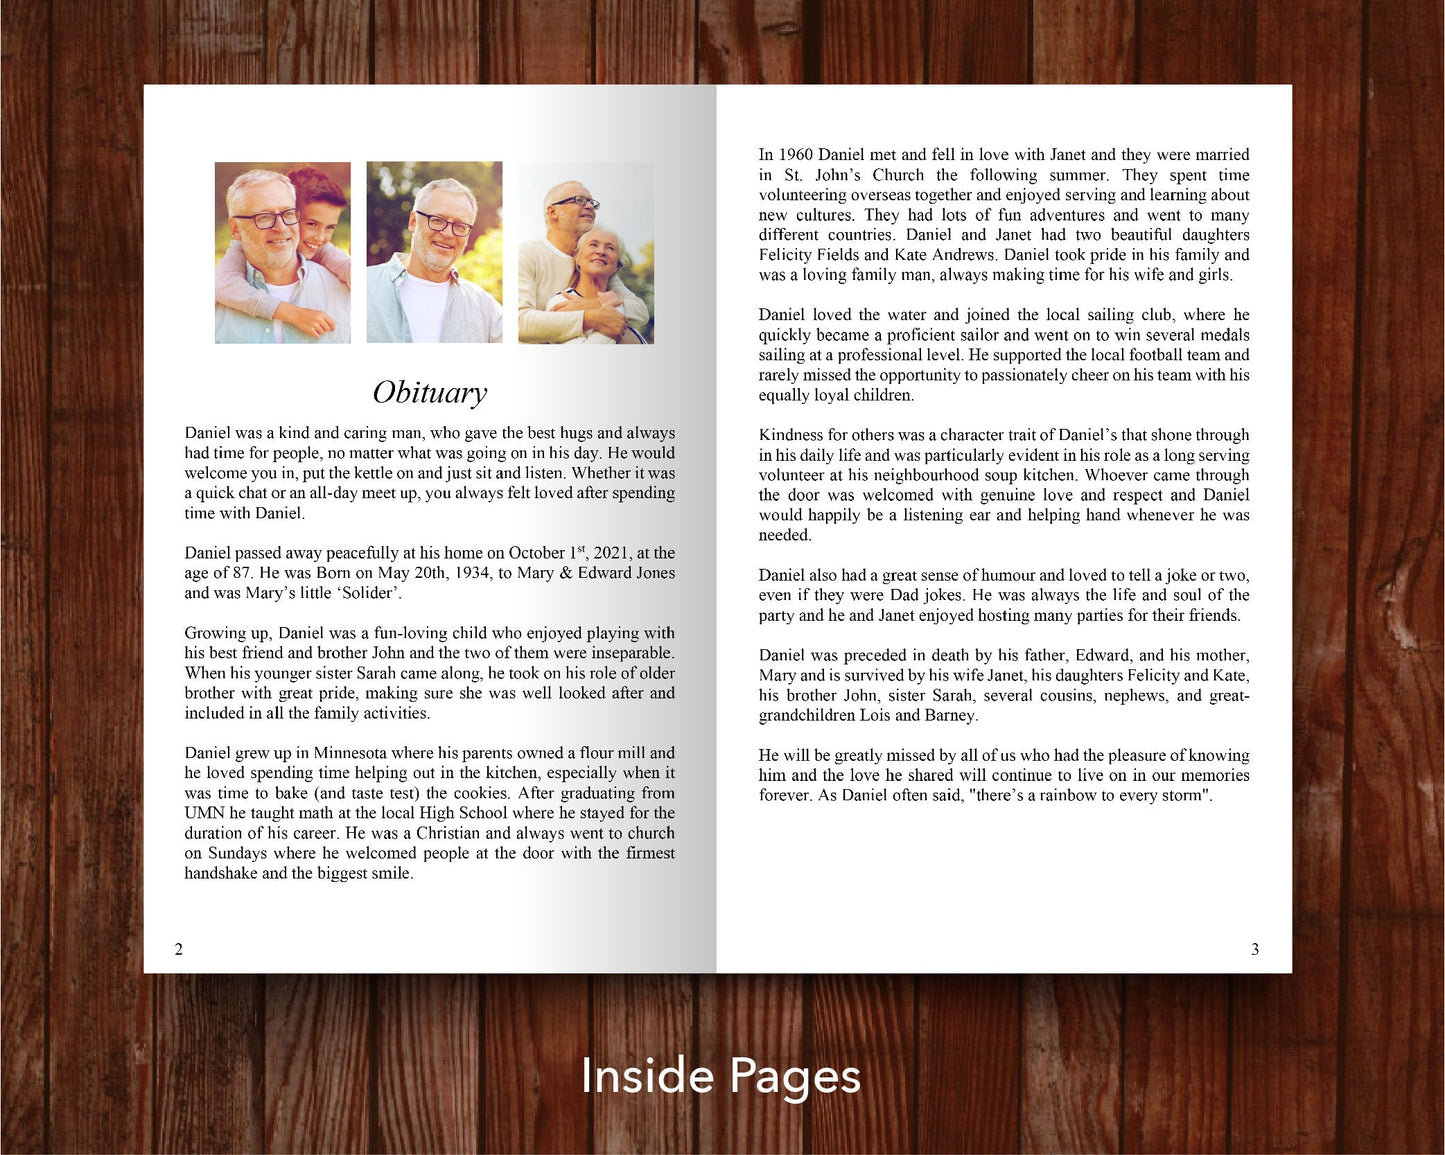 12 Page Photo Collage Funeral Program Template